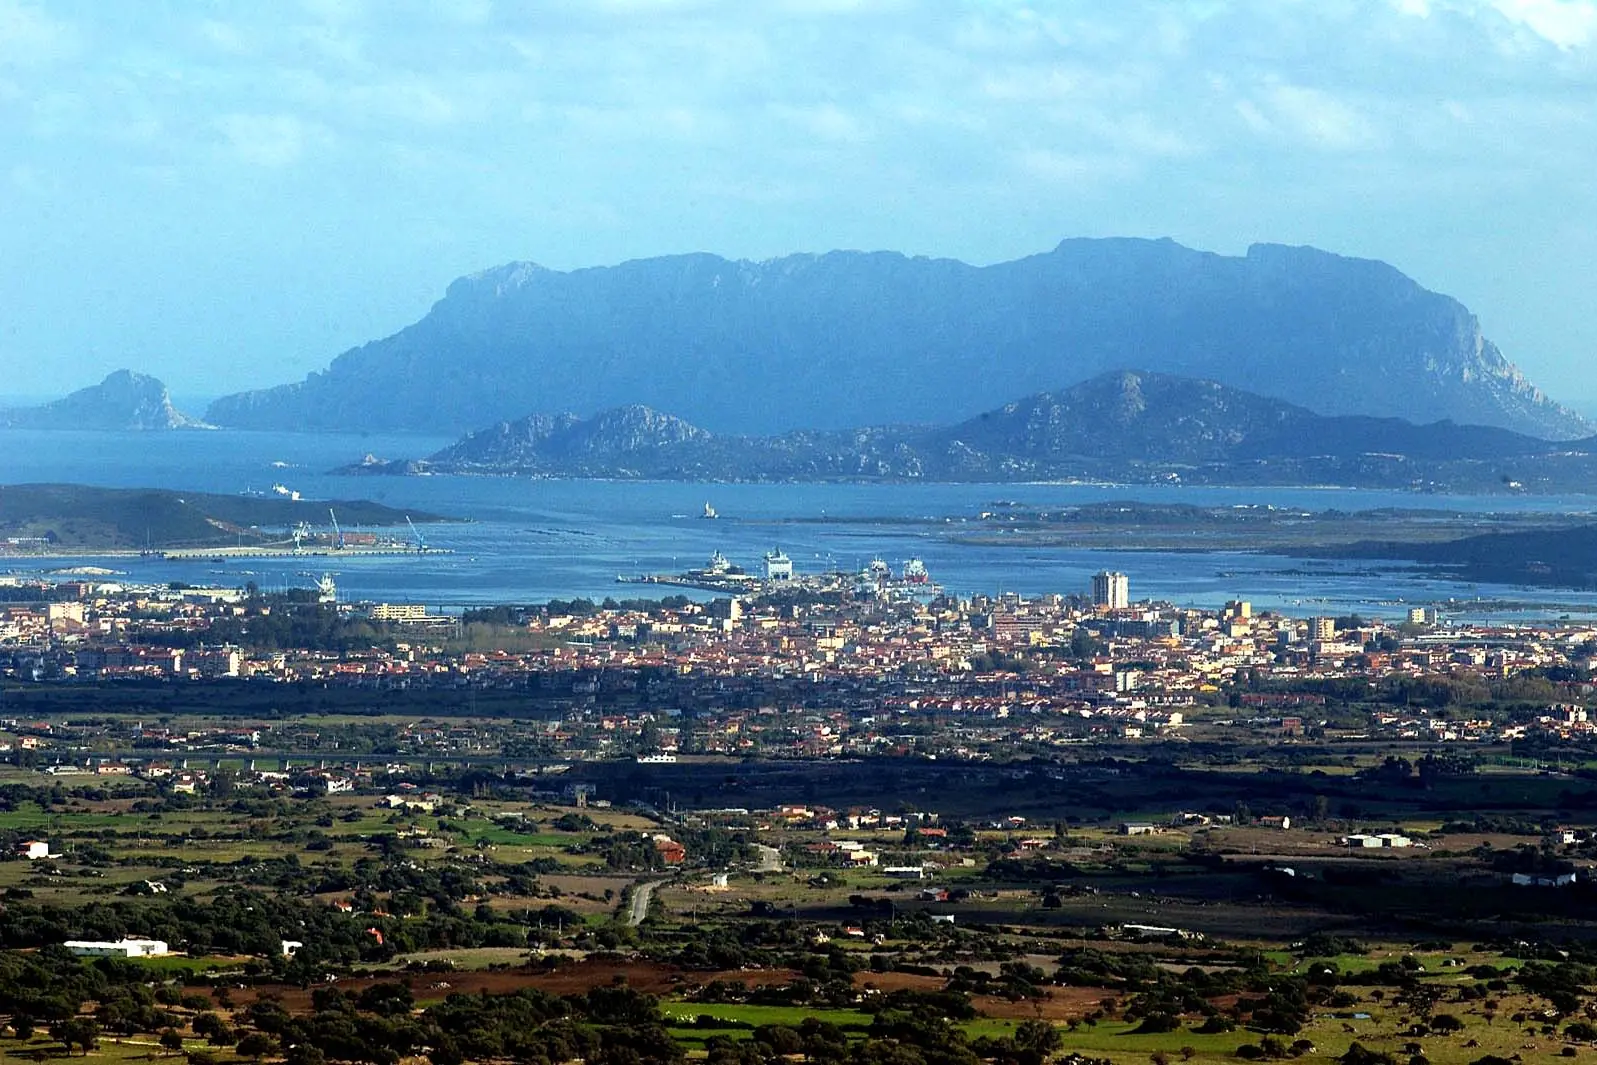 An overview of Olbia